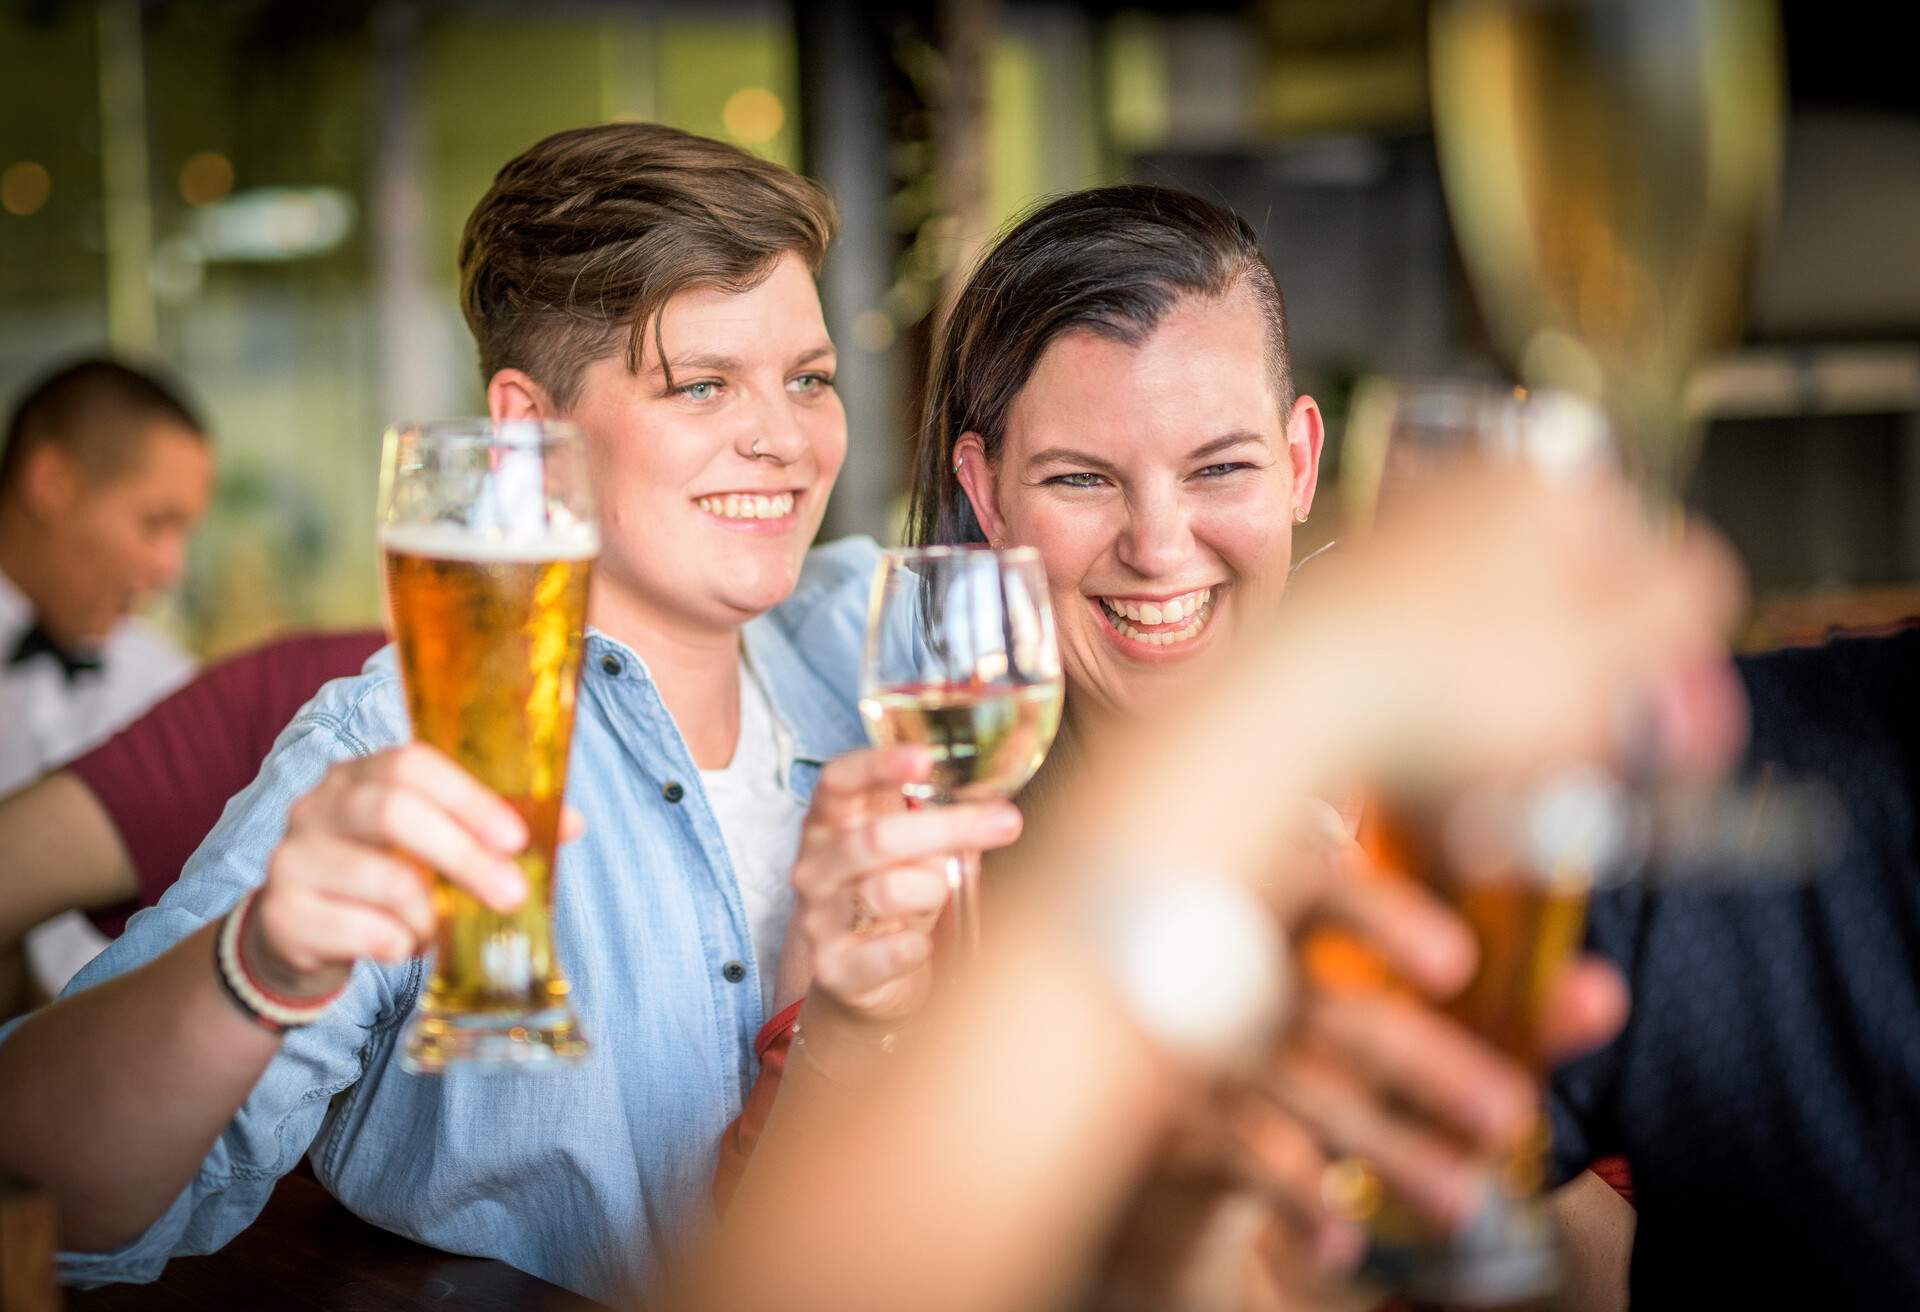 Smiling lesbian couple toasting drinks. Young women are spending leisure time at restaurant. They are enjoying at bar.